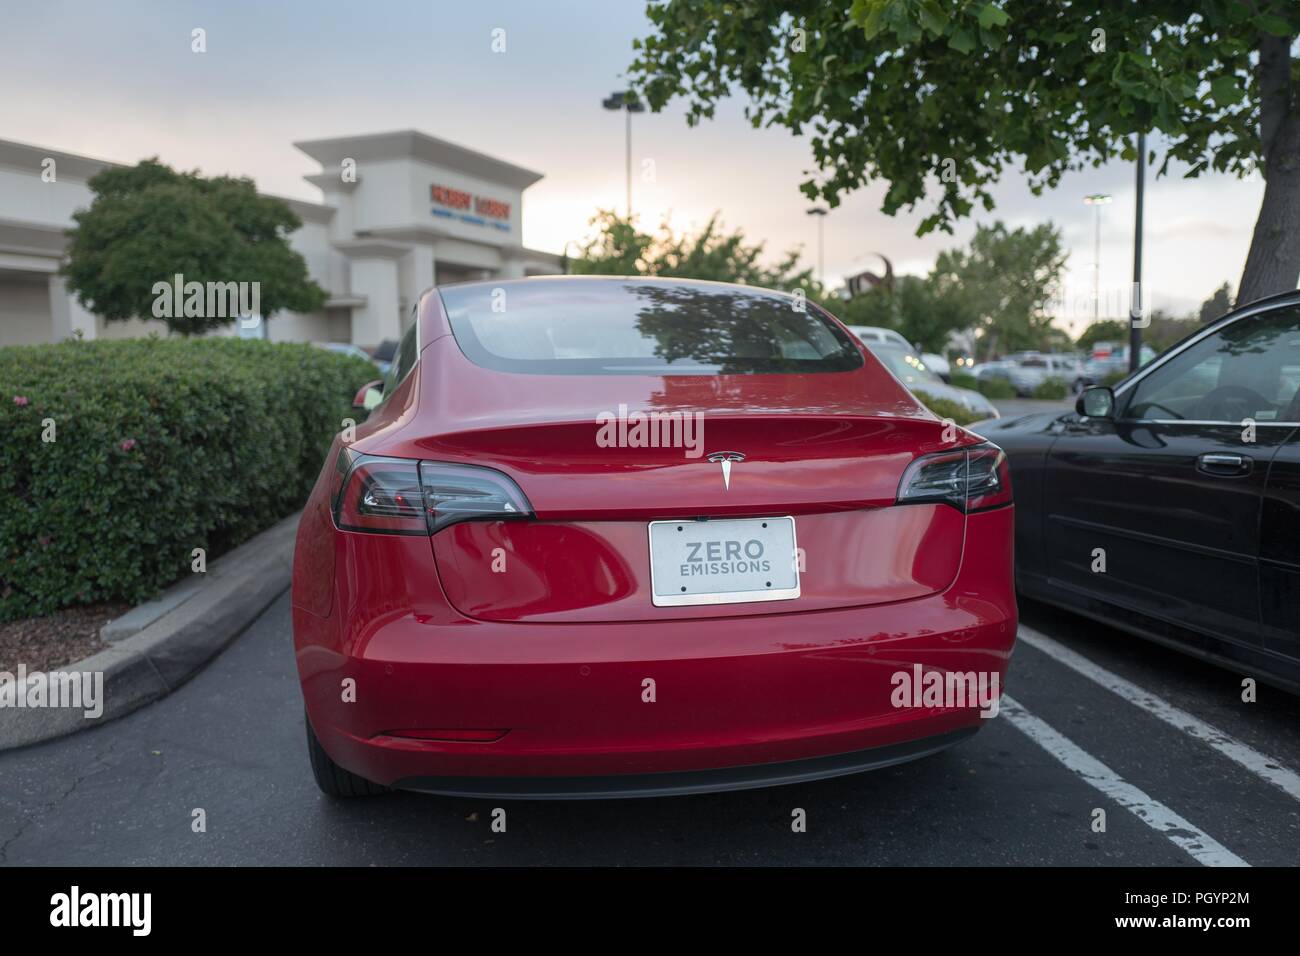 https://c8.alamy.com/comp/PGYP2M/rear-view-of-a-red-tesla-model-3-electric-car-from-tesla-motors-with-a-license-plate-reading-zero-emissions-under-a-dramatic-sky-in-the-san-francisco-bay-area-dublin-california-may-21-2018-PGYP2M.jpg